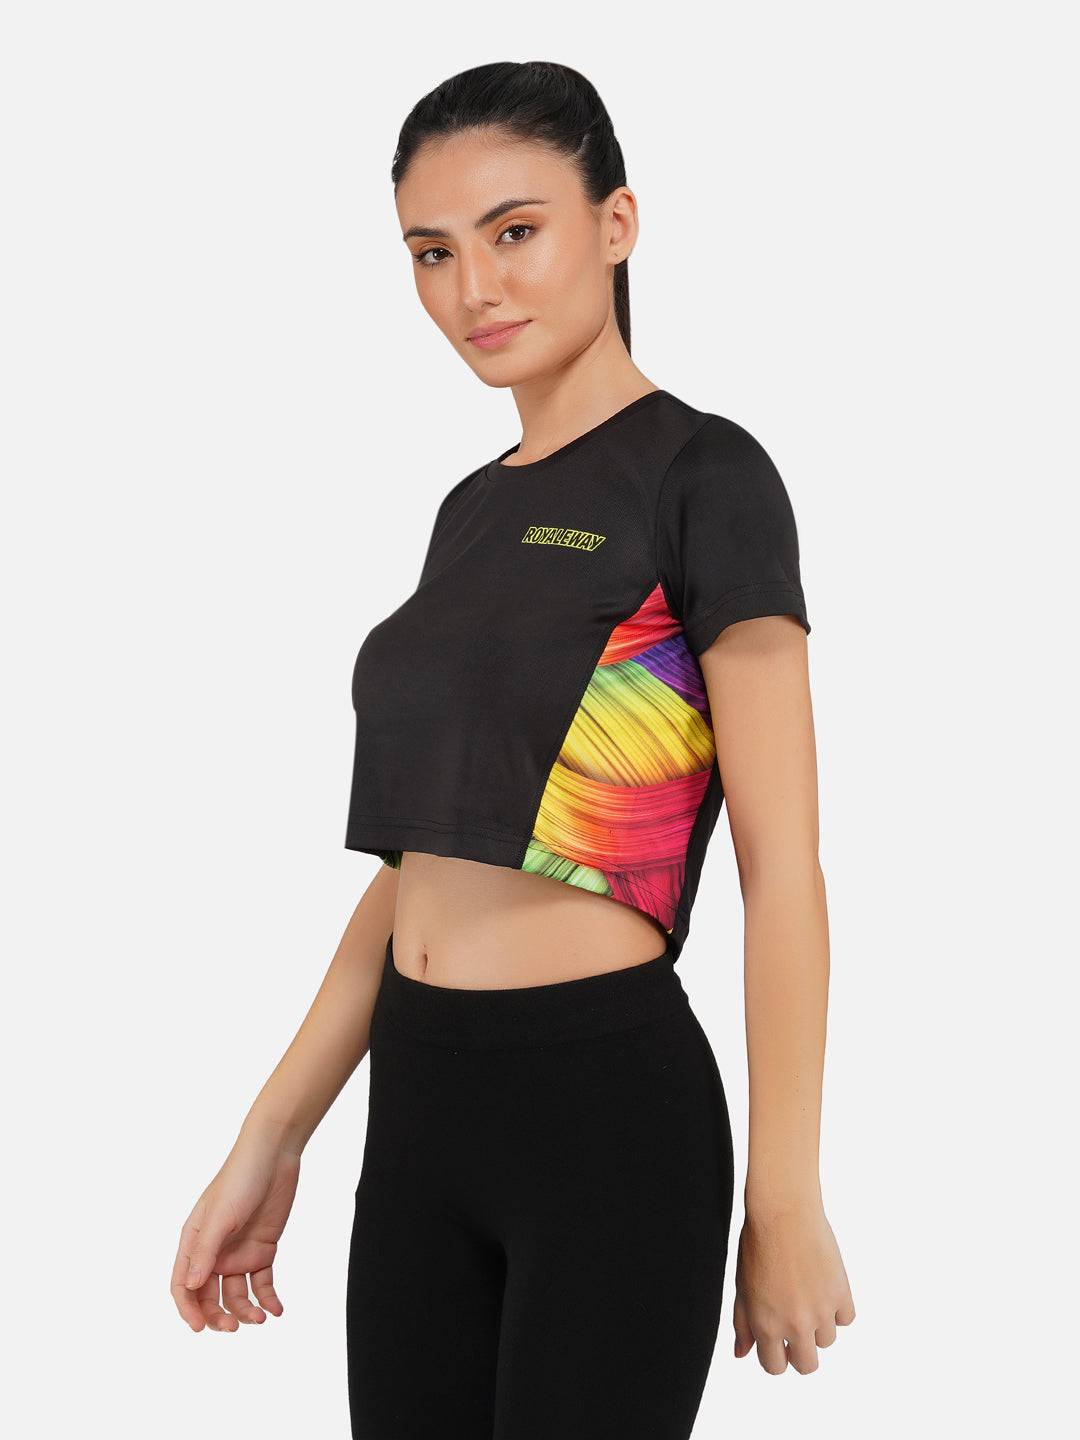 LONG BACK CROP TOP BLACK AND MULTI COLOR RWW2030